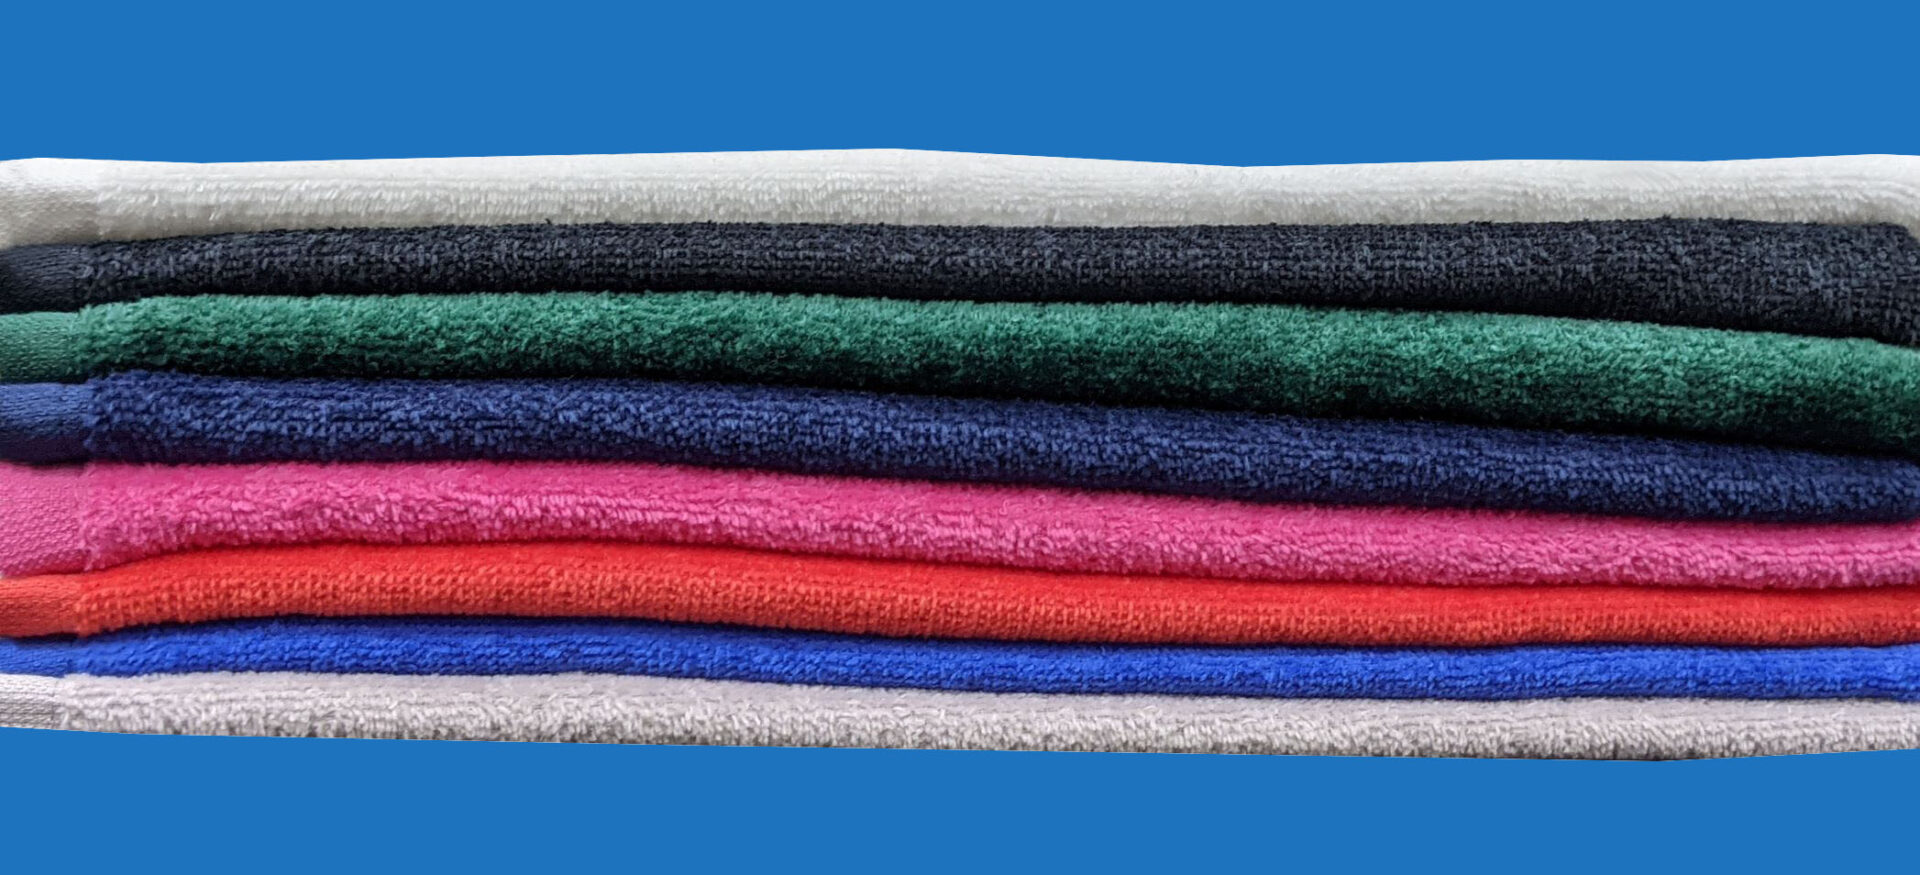 Colorful kitchen towels stacked on each other